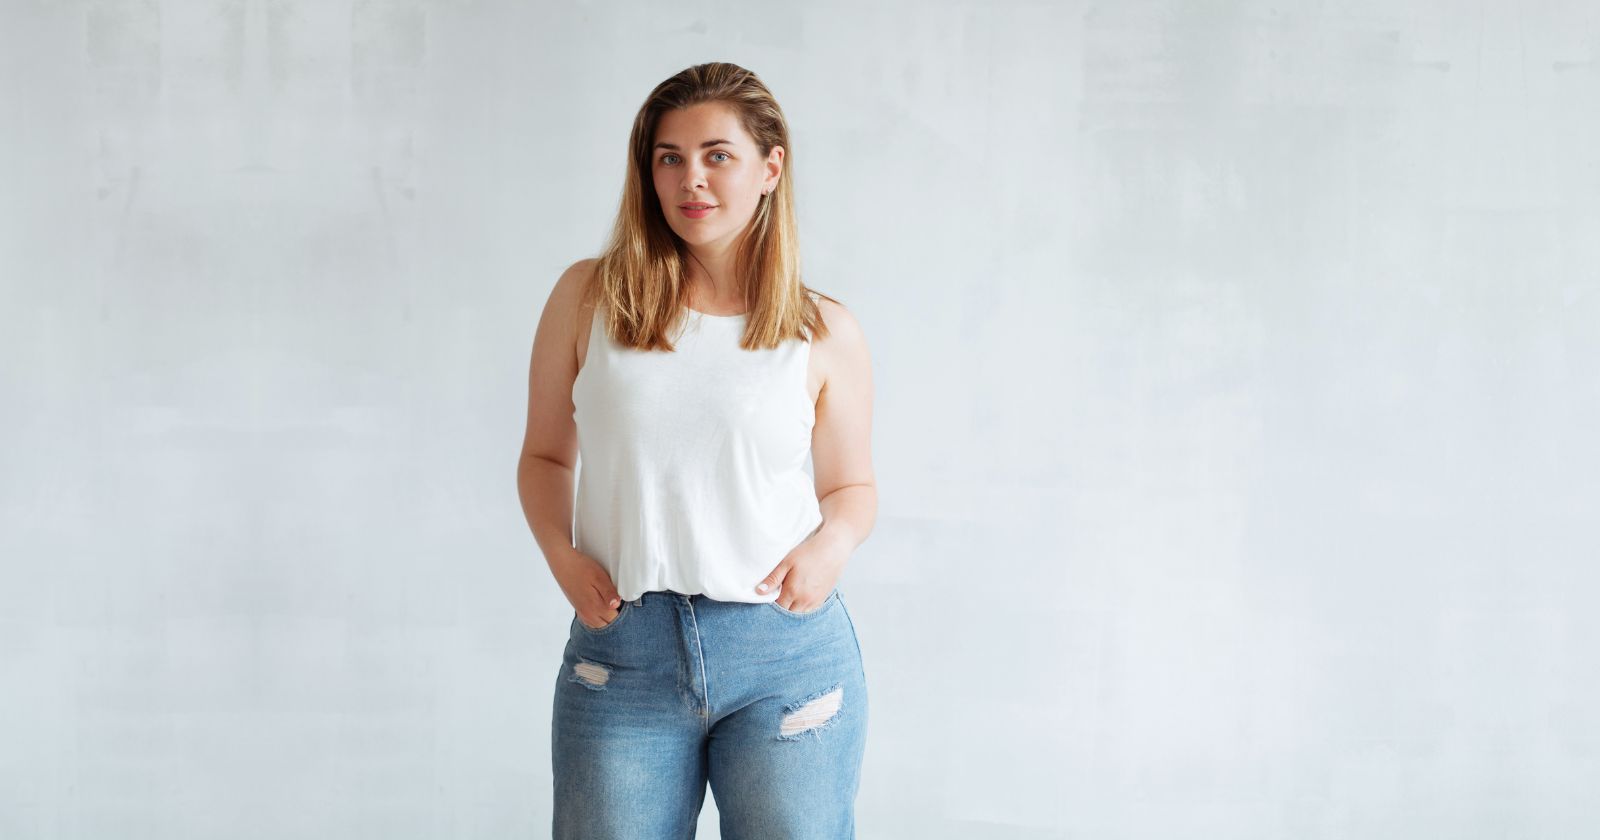 Jeans Styles That Flatter Pear Shaped Figure Featured